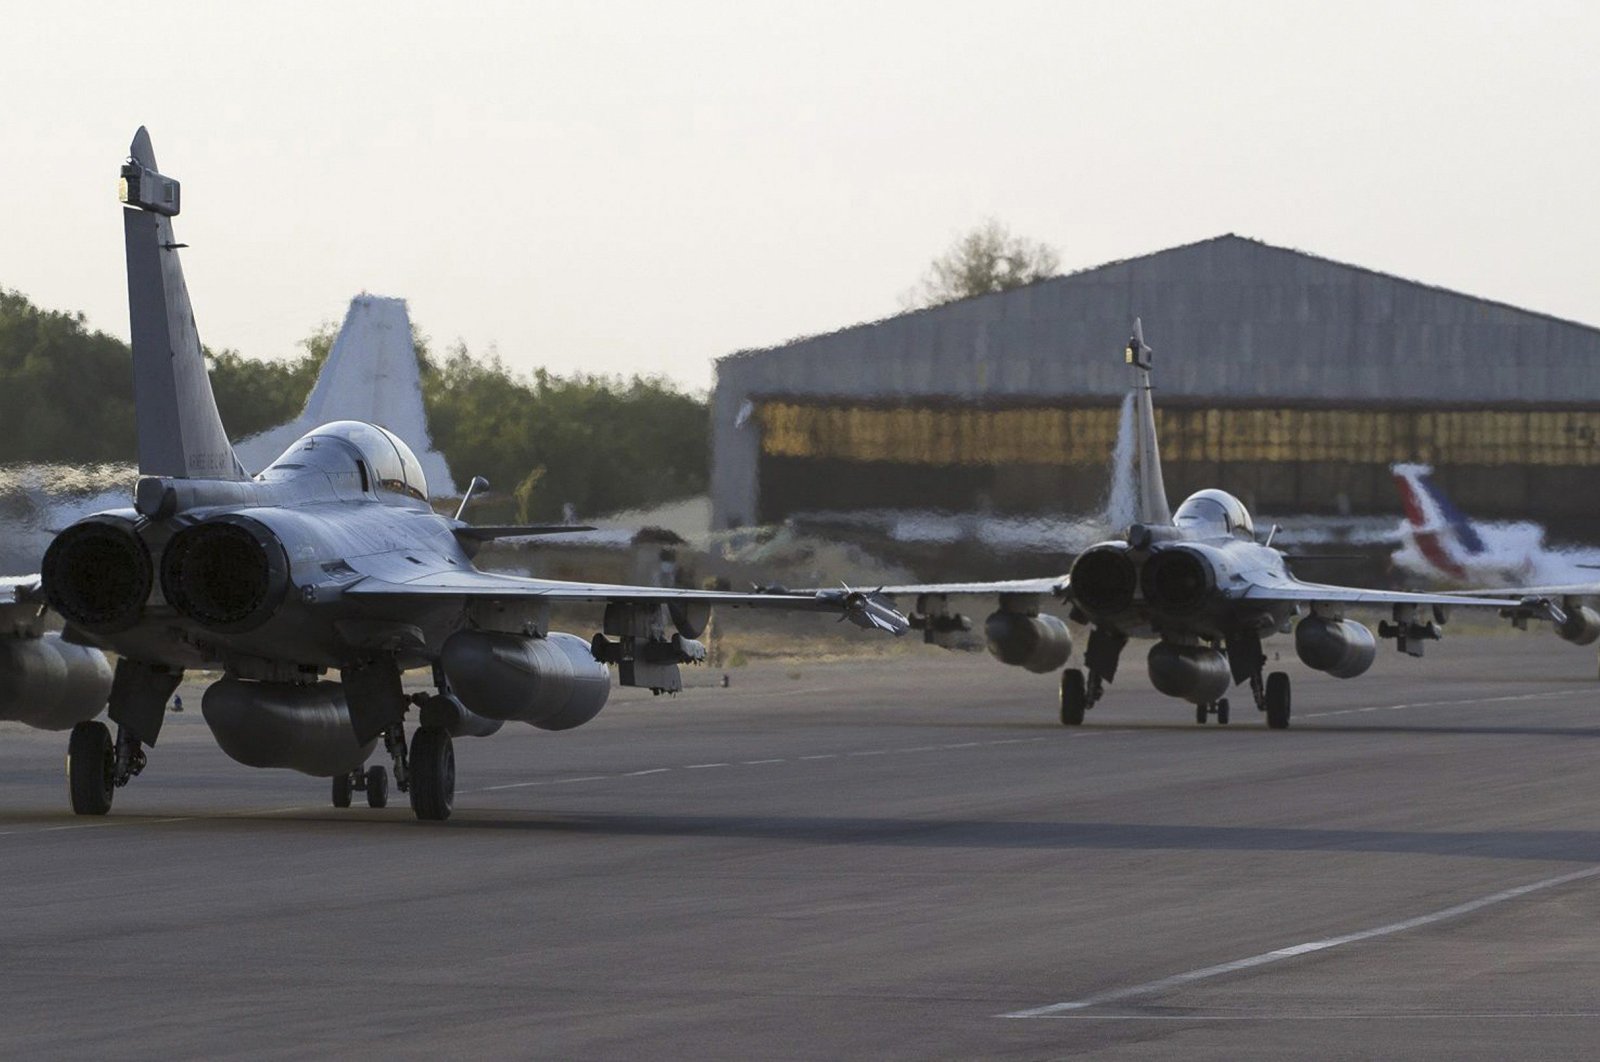 French Rafale fighter jets taxi on the runway, before their deployment in Mali, after landing in Ndjamena, Chad, Jan. 13, 2013.  (French Military Communications Audiovisual office via Reuters)